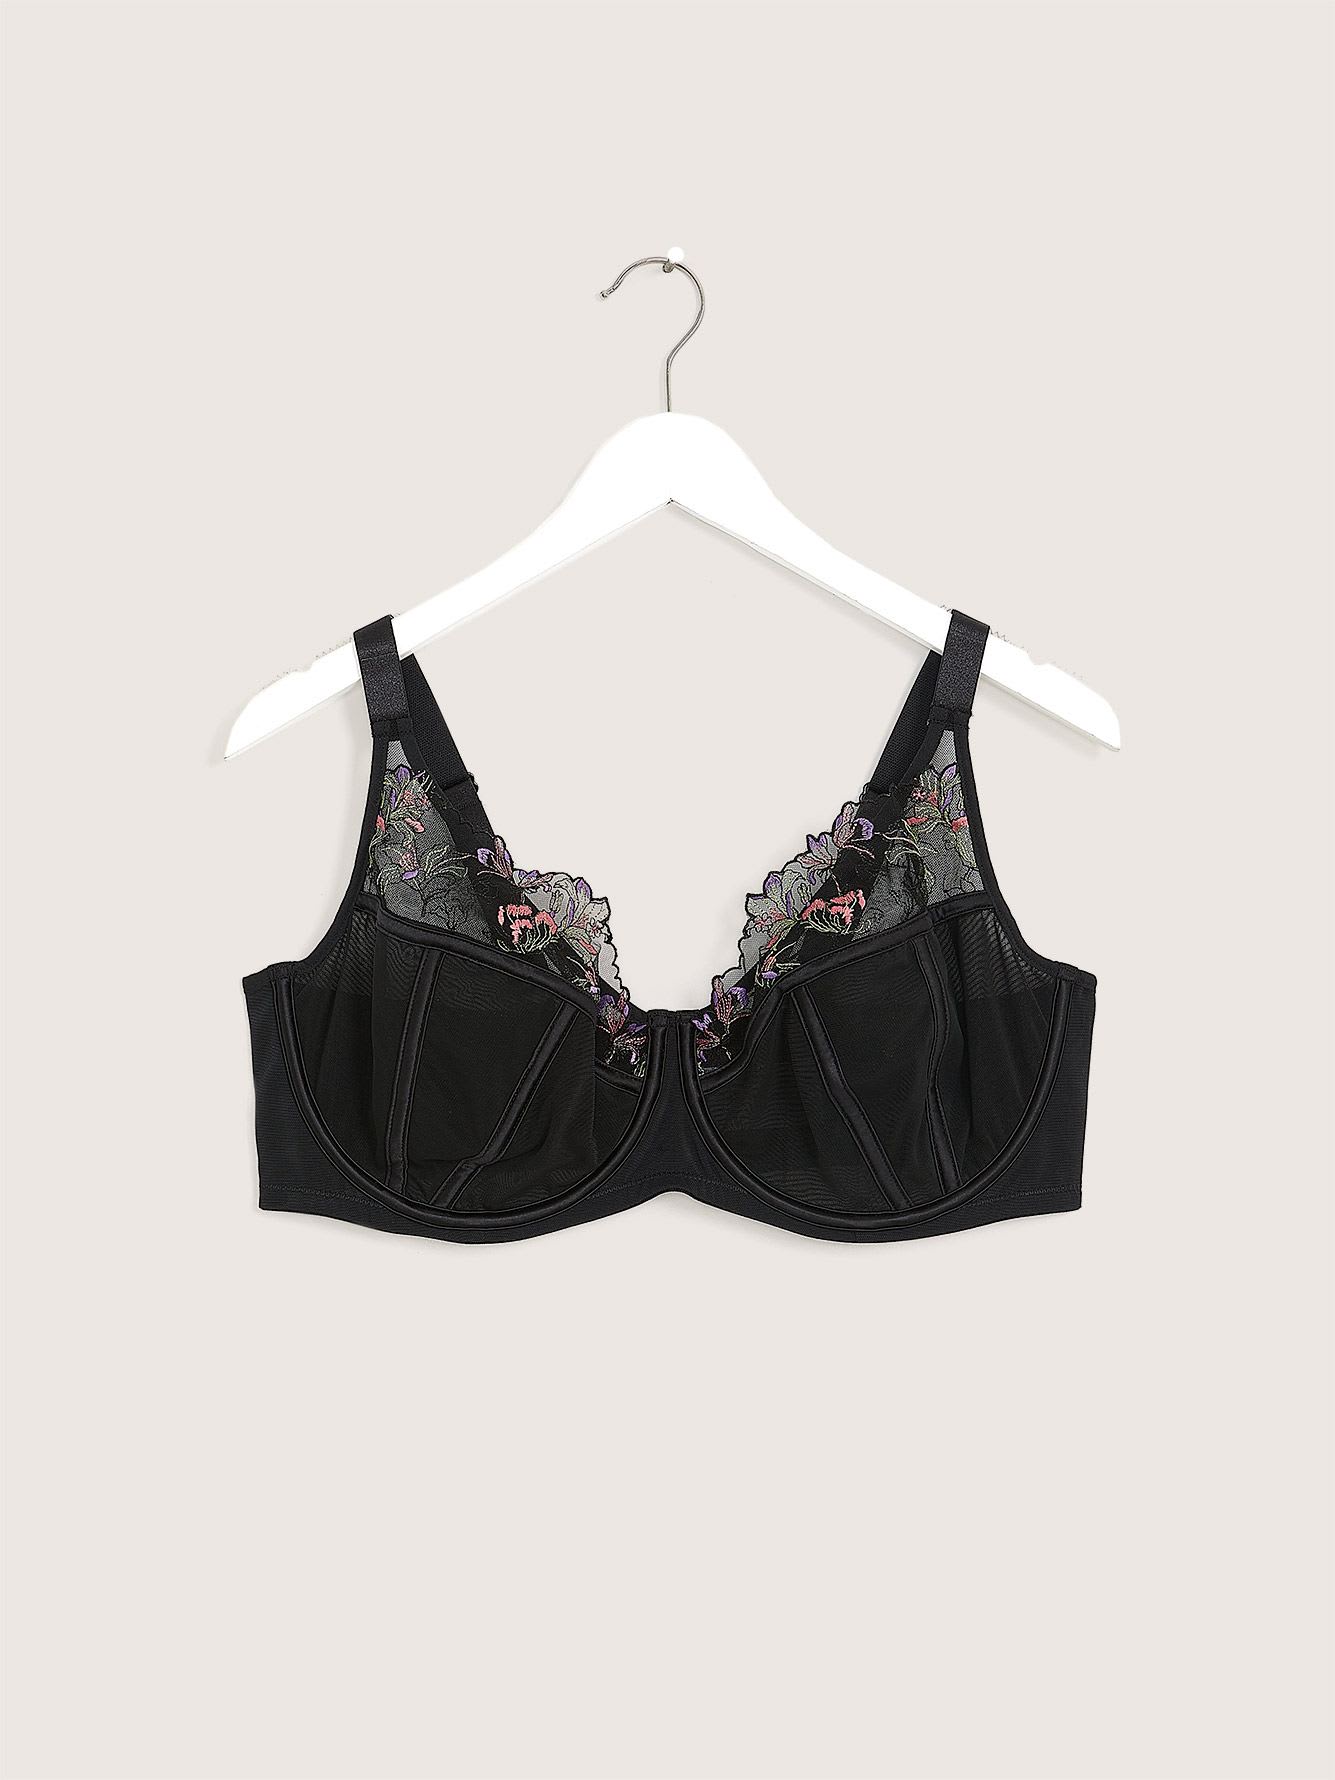  ZYLDDP Women's Bra Full Coverage Floral Lace Plus Size  Underwired Bra， A Daily Bra for All Seasons (Color : Black, Size : 36H) :  Clothing, Shoes & Jewelry